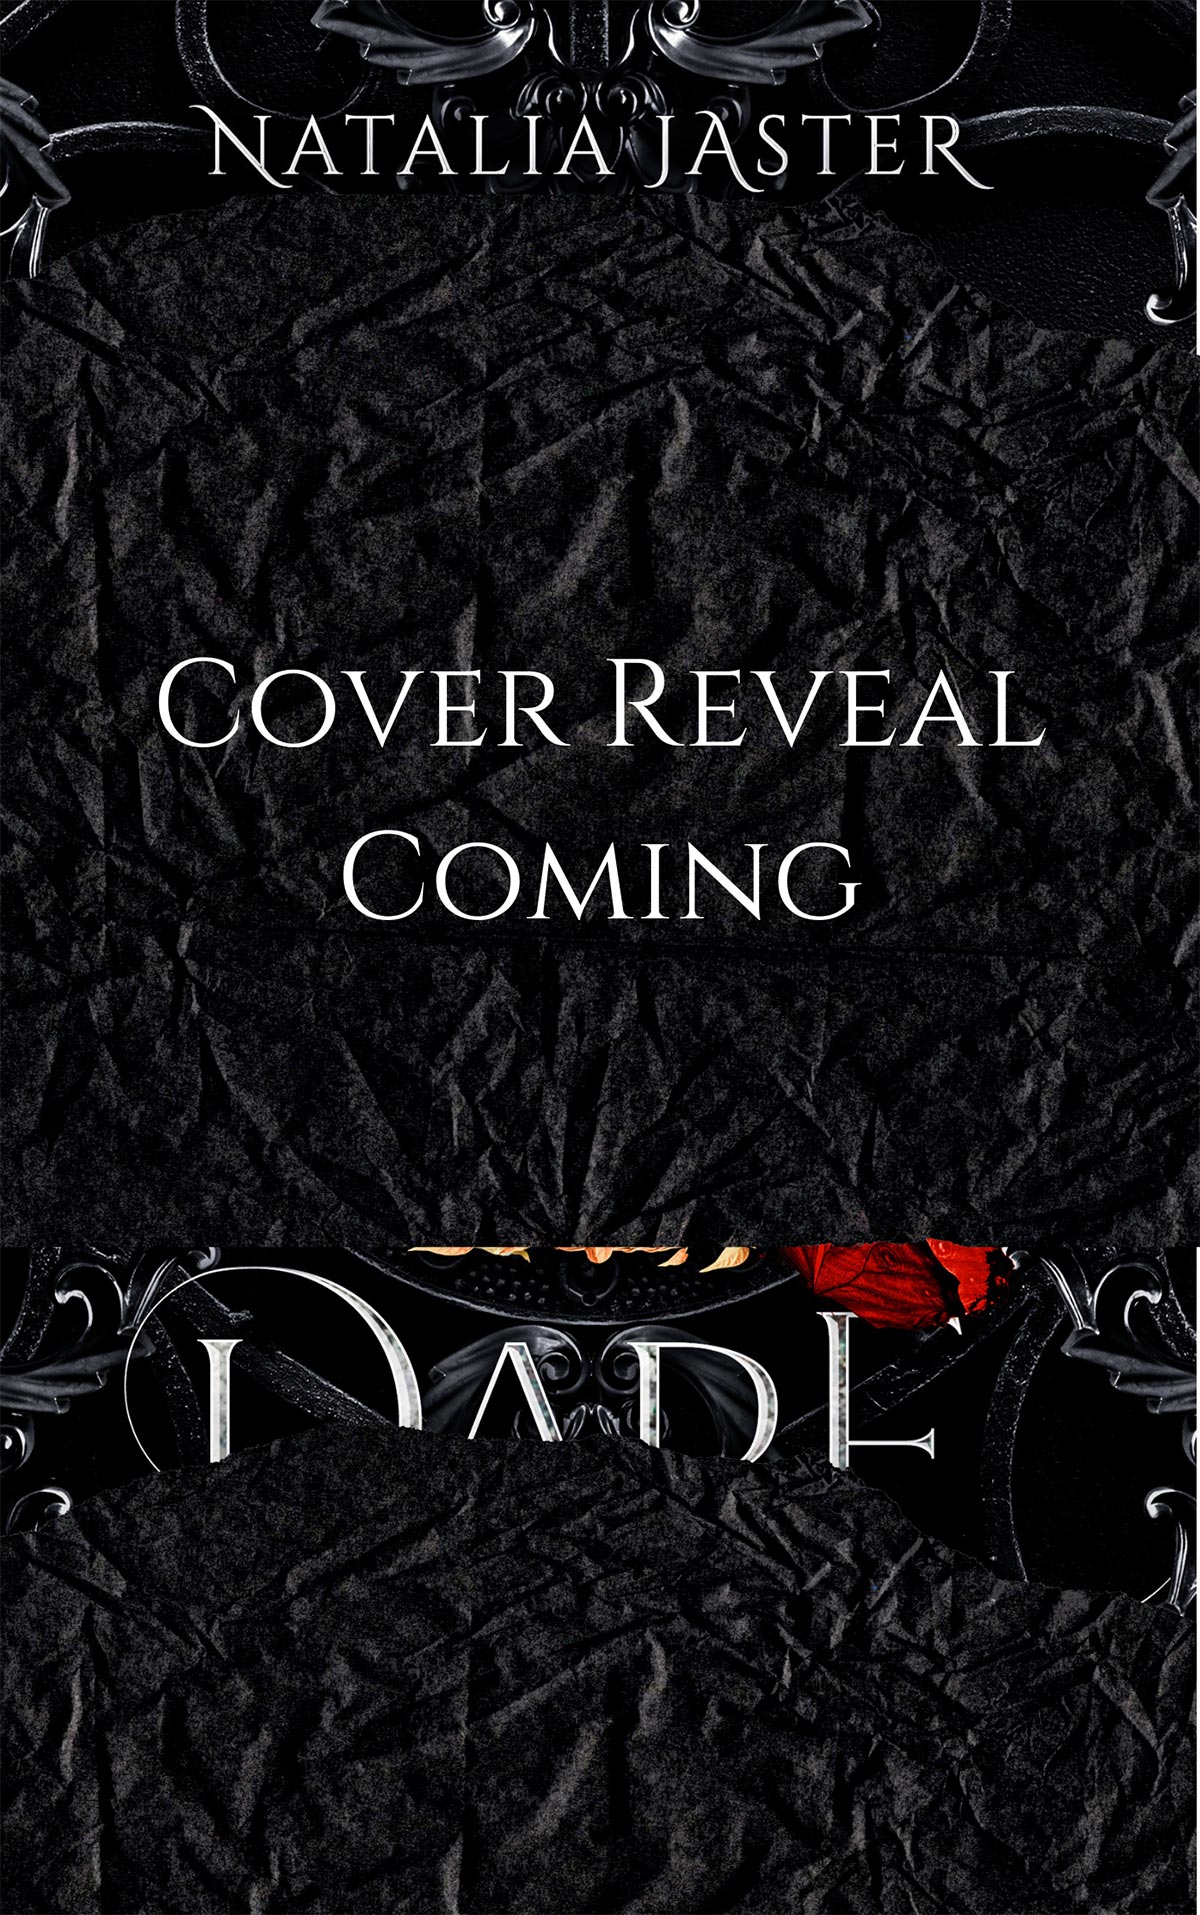 Cover Teaser for Dare by Natalia Jaster